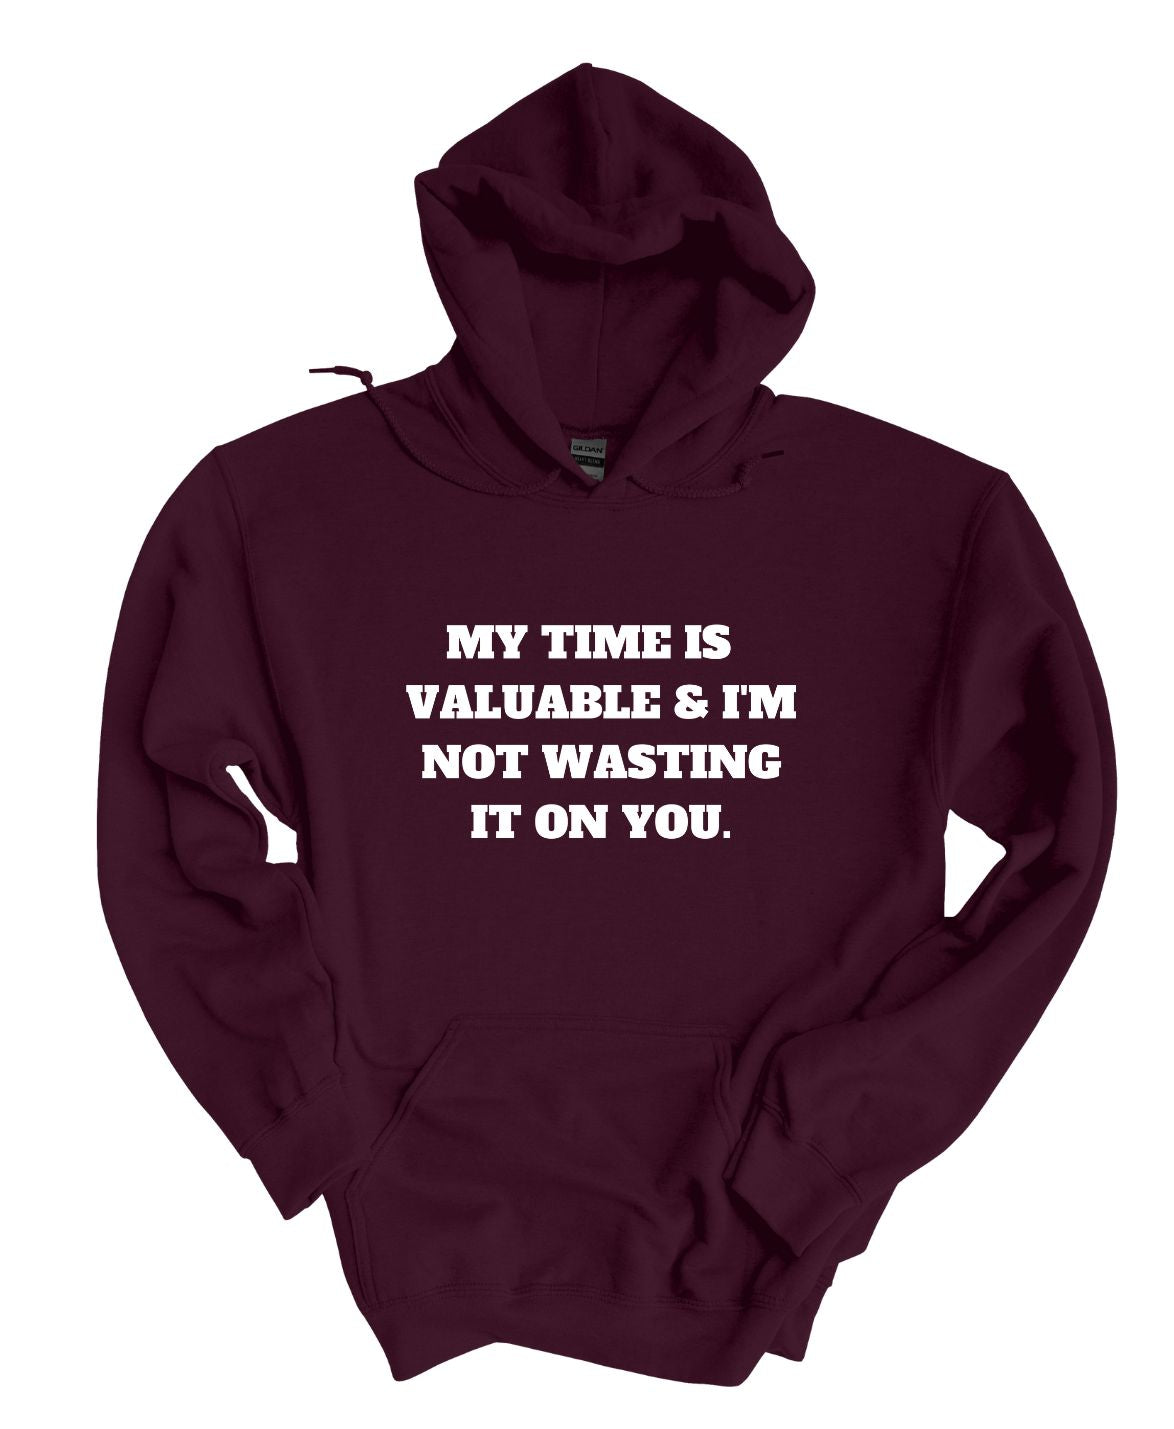 My time is valuable  Hoodies